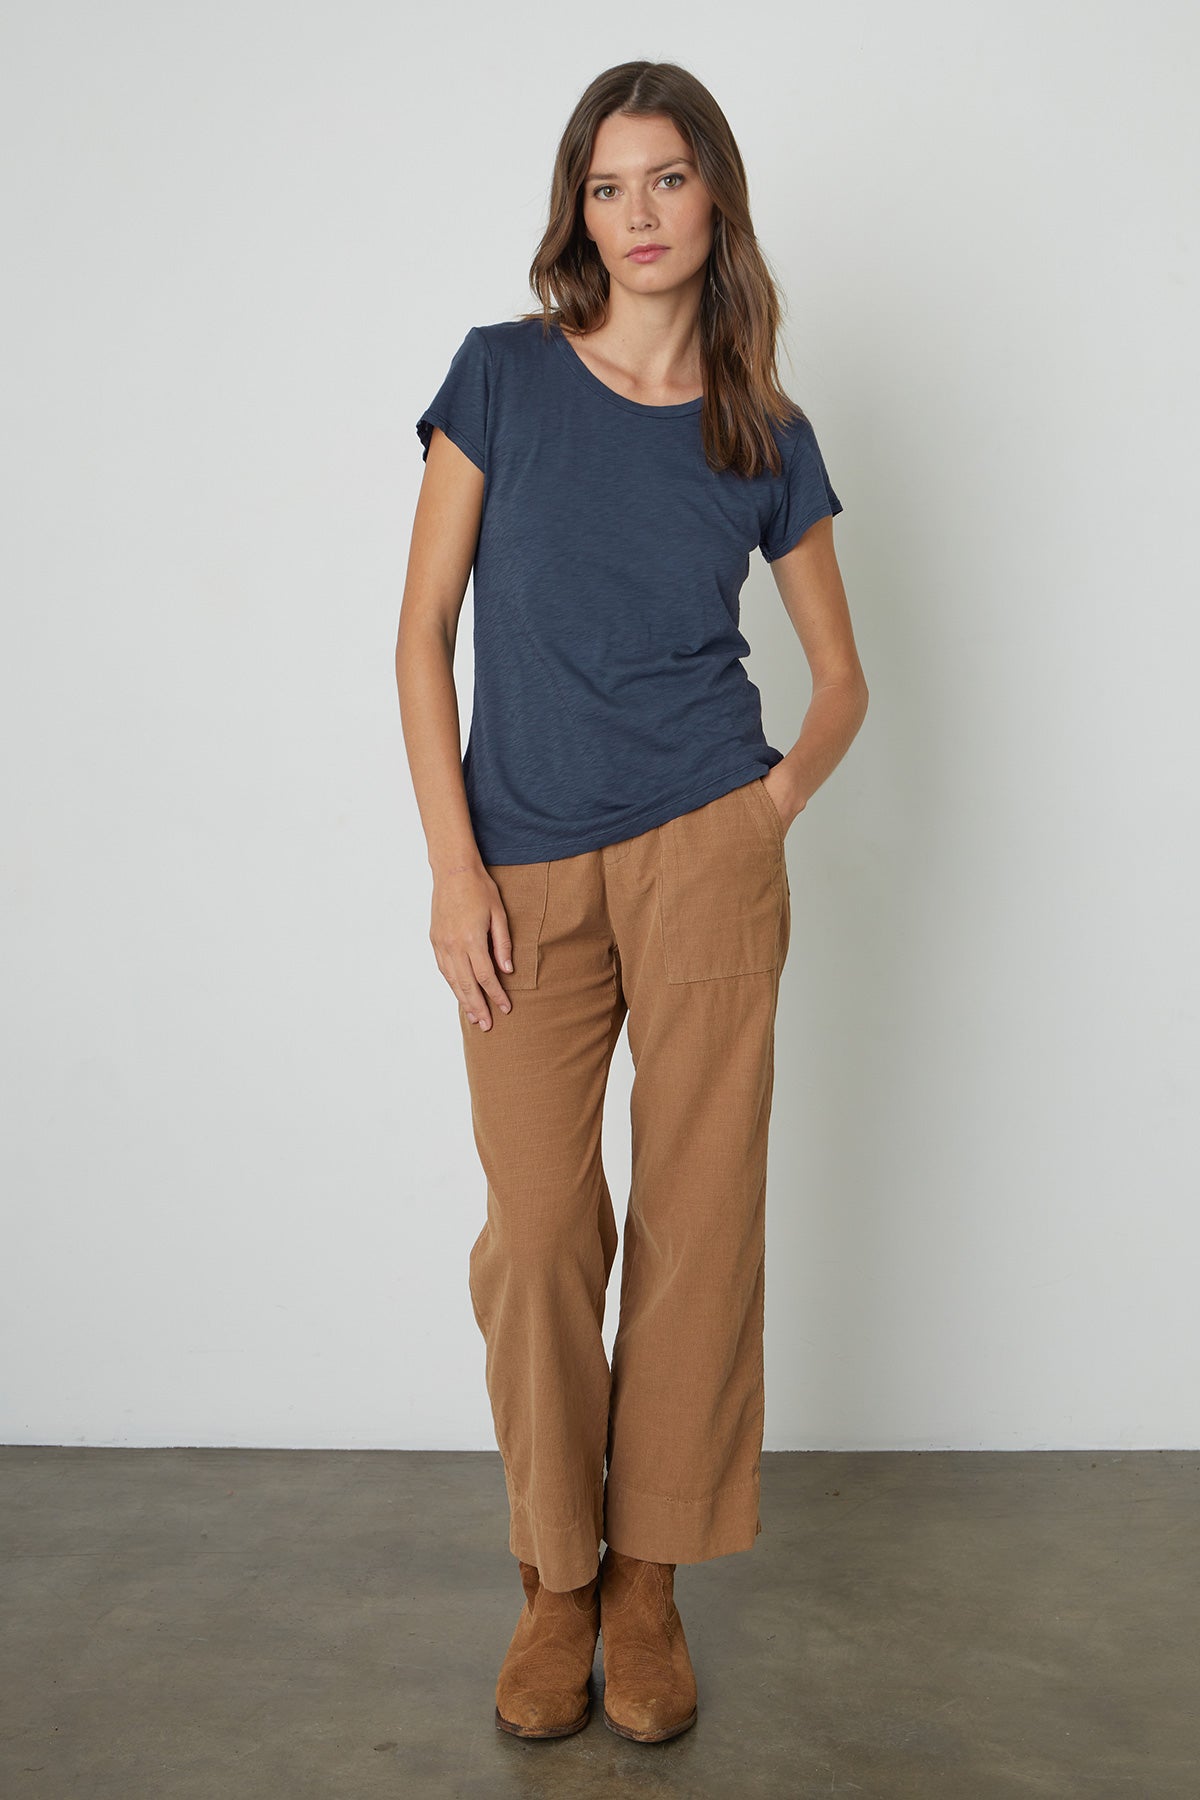 Vera Corduroy Wide Leg Pant in canyon with Odelia Tee in shadow front-26654355783873